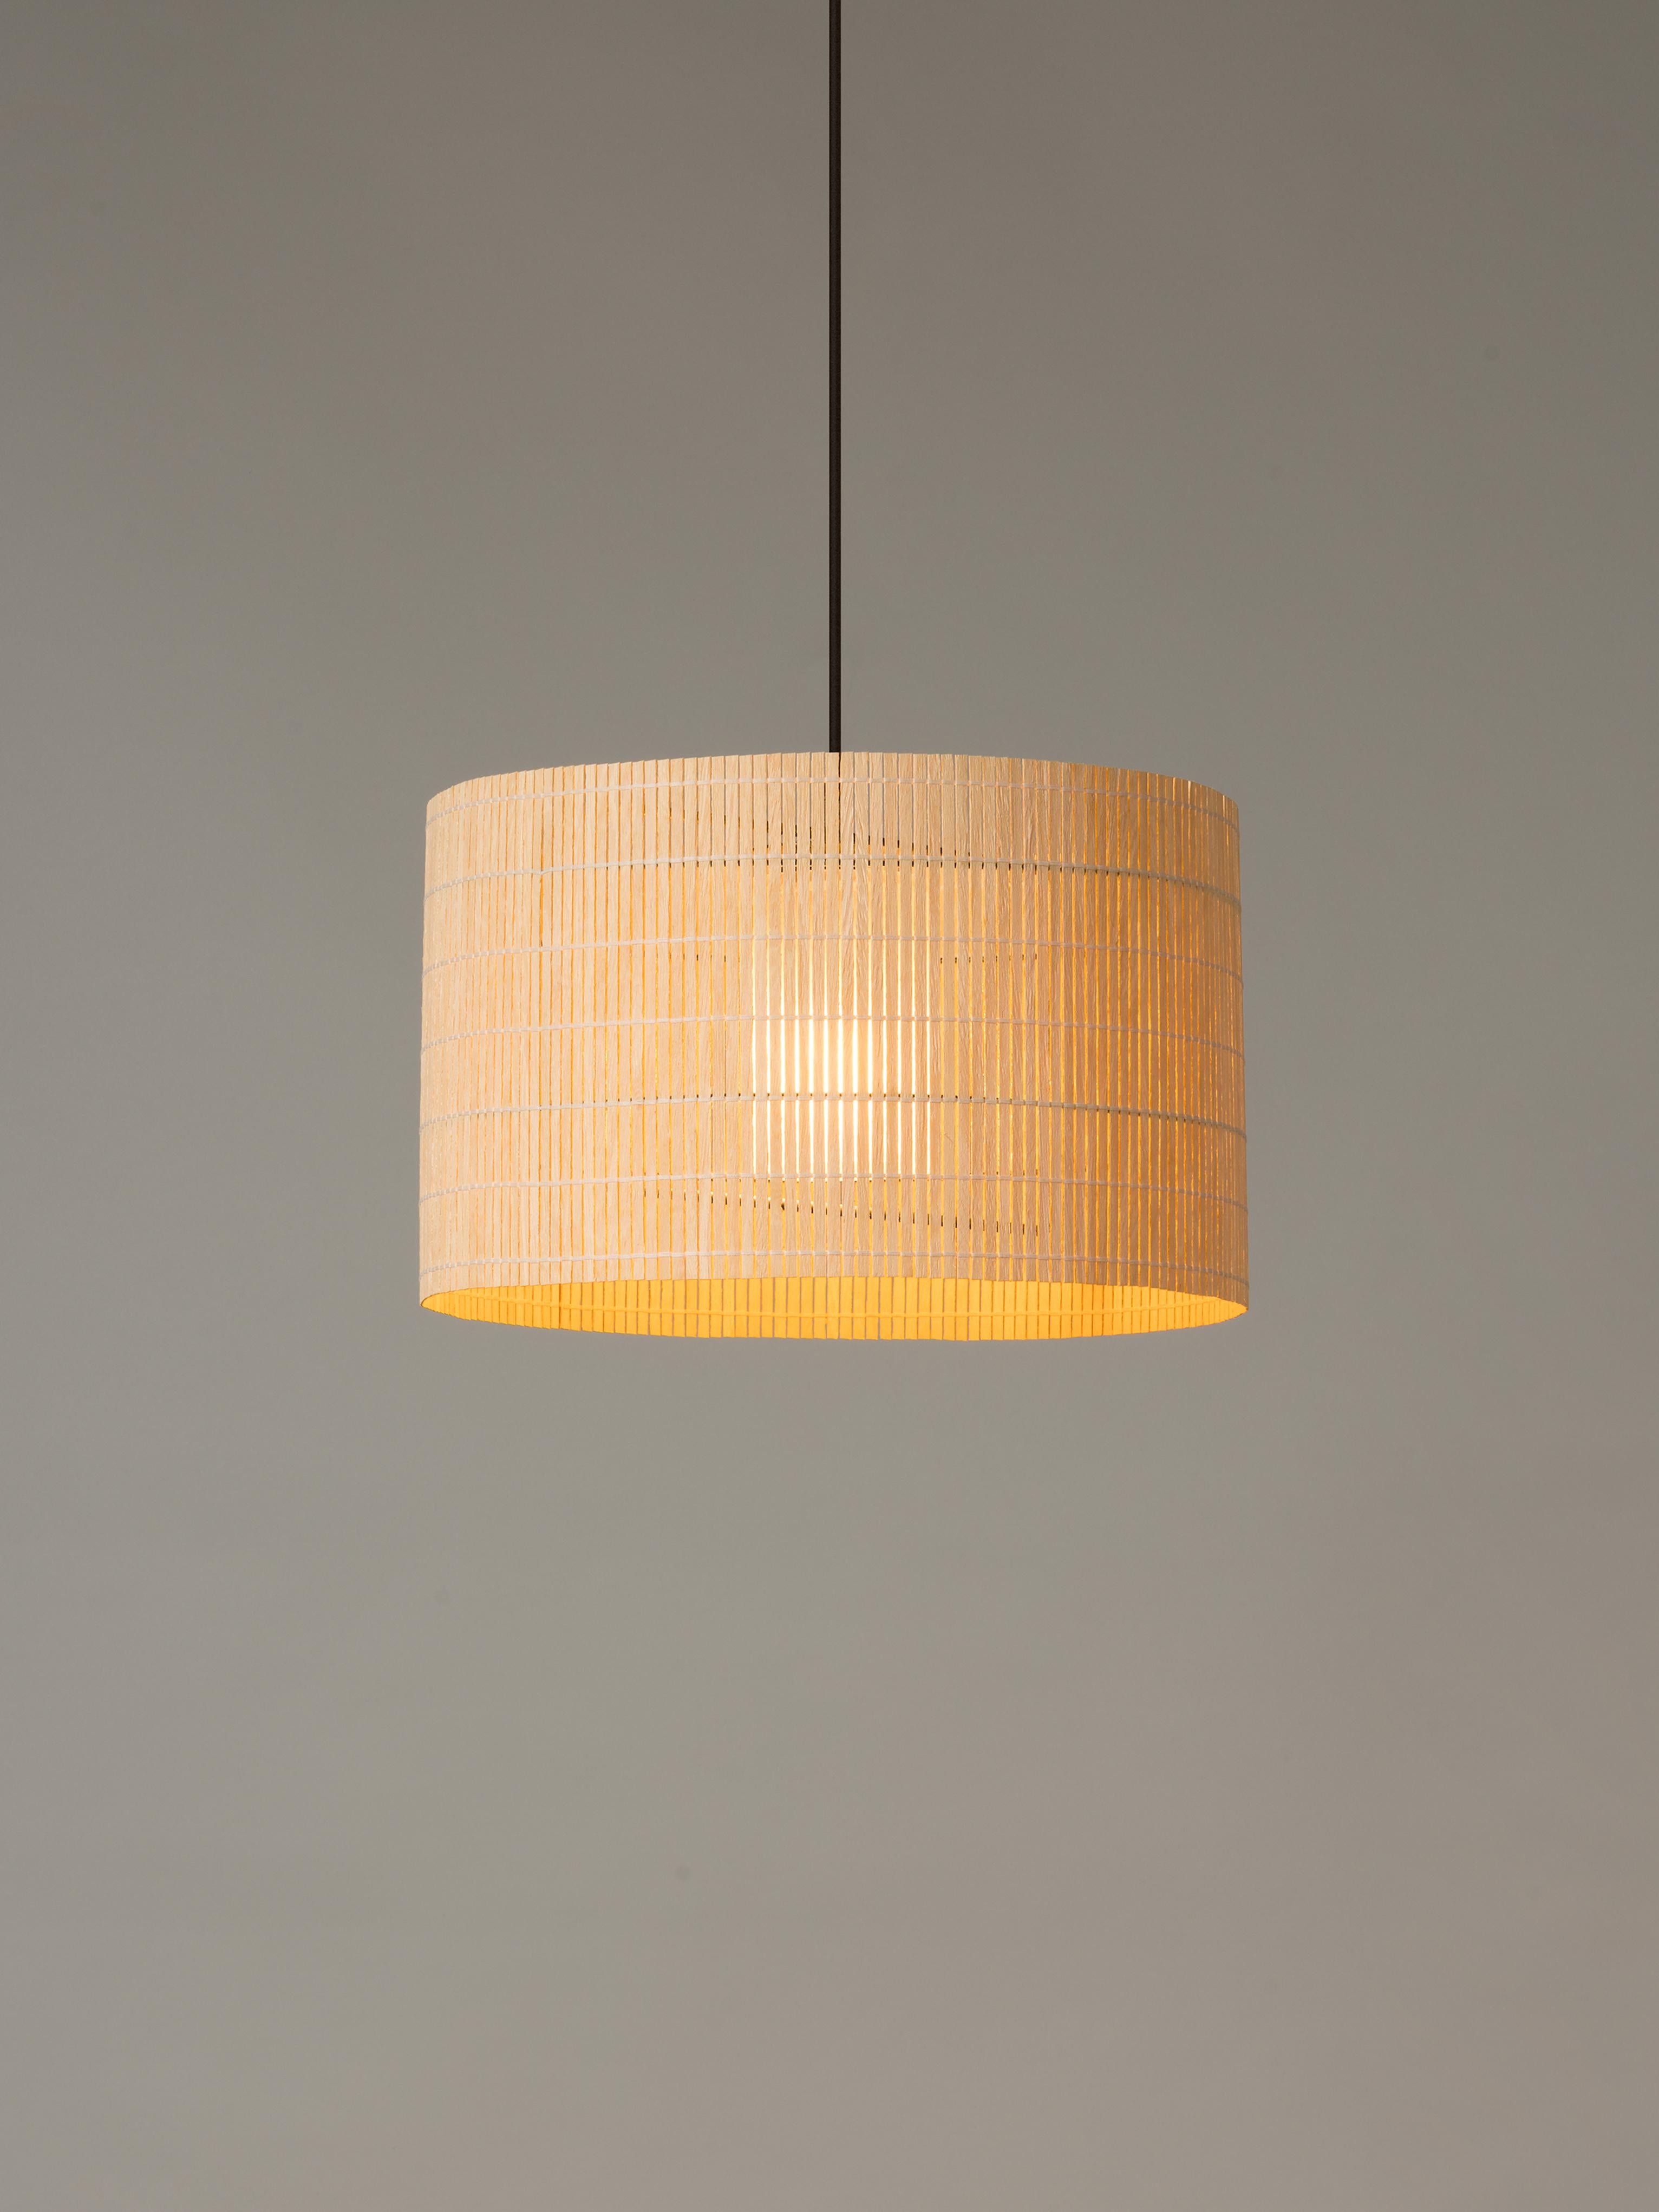 Nagoya pendant lamp by Ferran Freixa
Dimensions: D 42 x H 25 cm
Materials: Wood strips, metal.

Nagoya is made of thin vertical strips of poplar wood attached to a discreet circular structure comprising metal rods. Poplar is a beautiful, soft